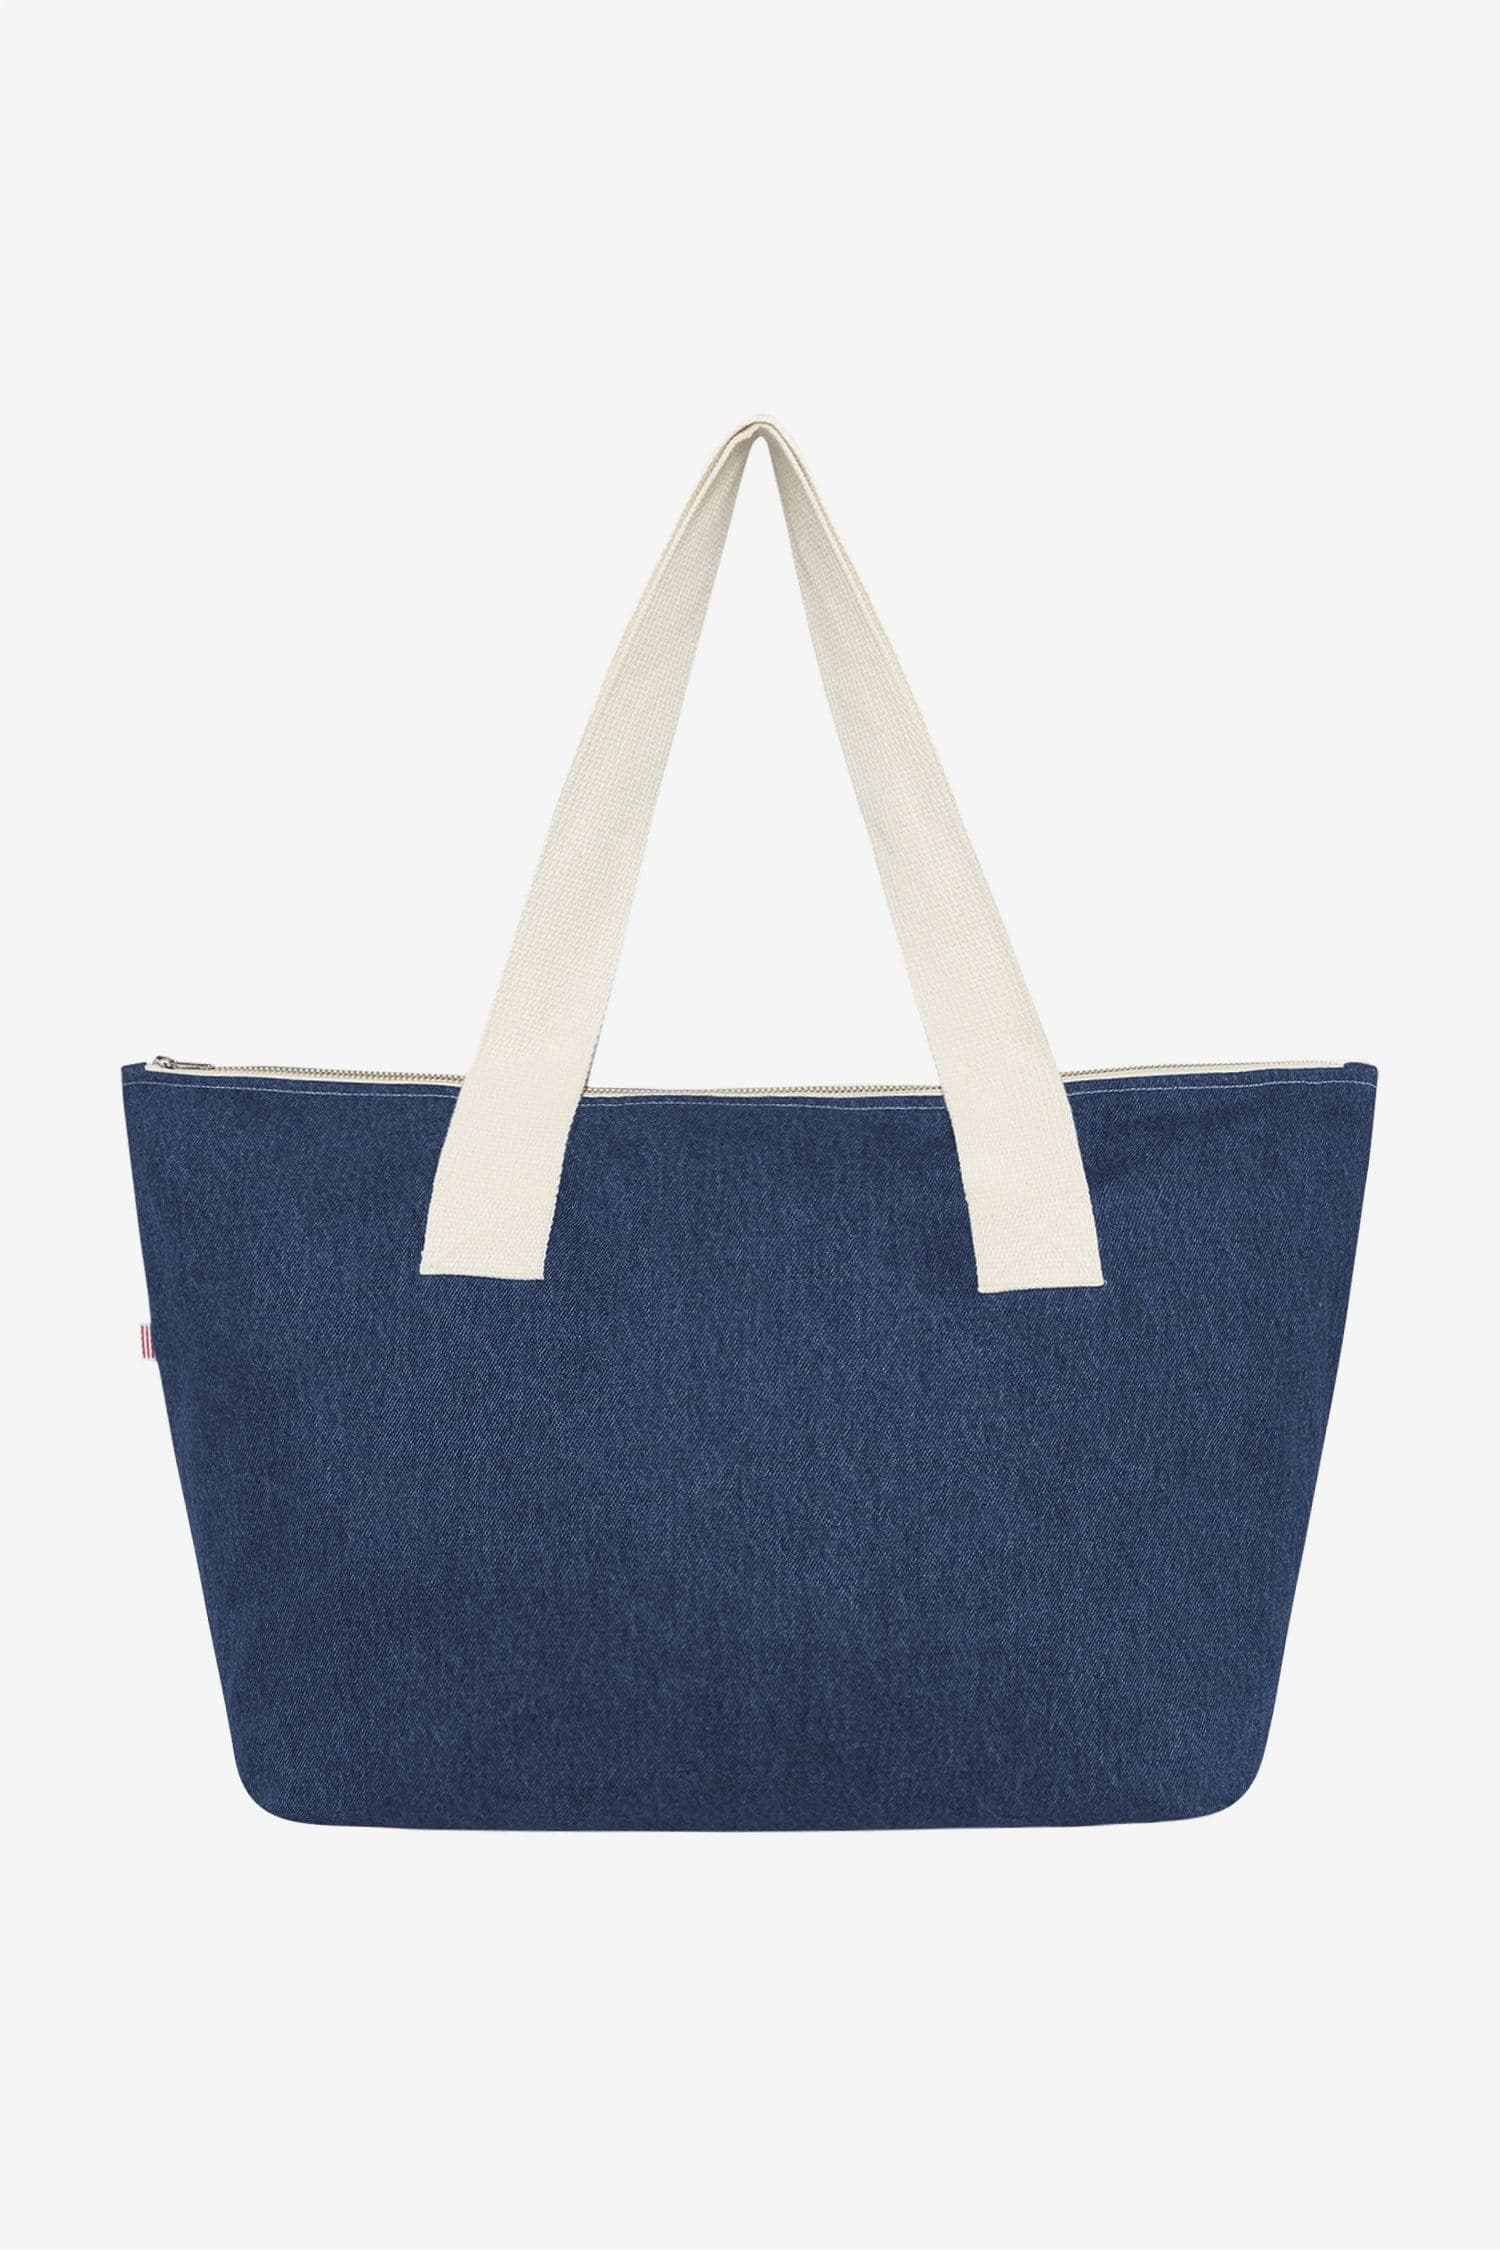 Bags Collections – Los Angeles Apparel - Japan